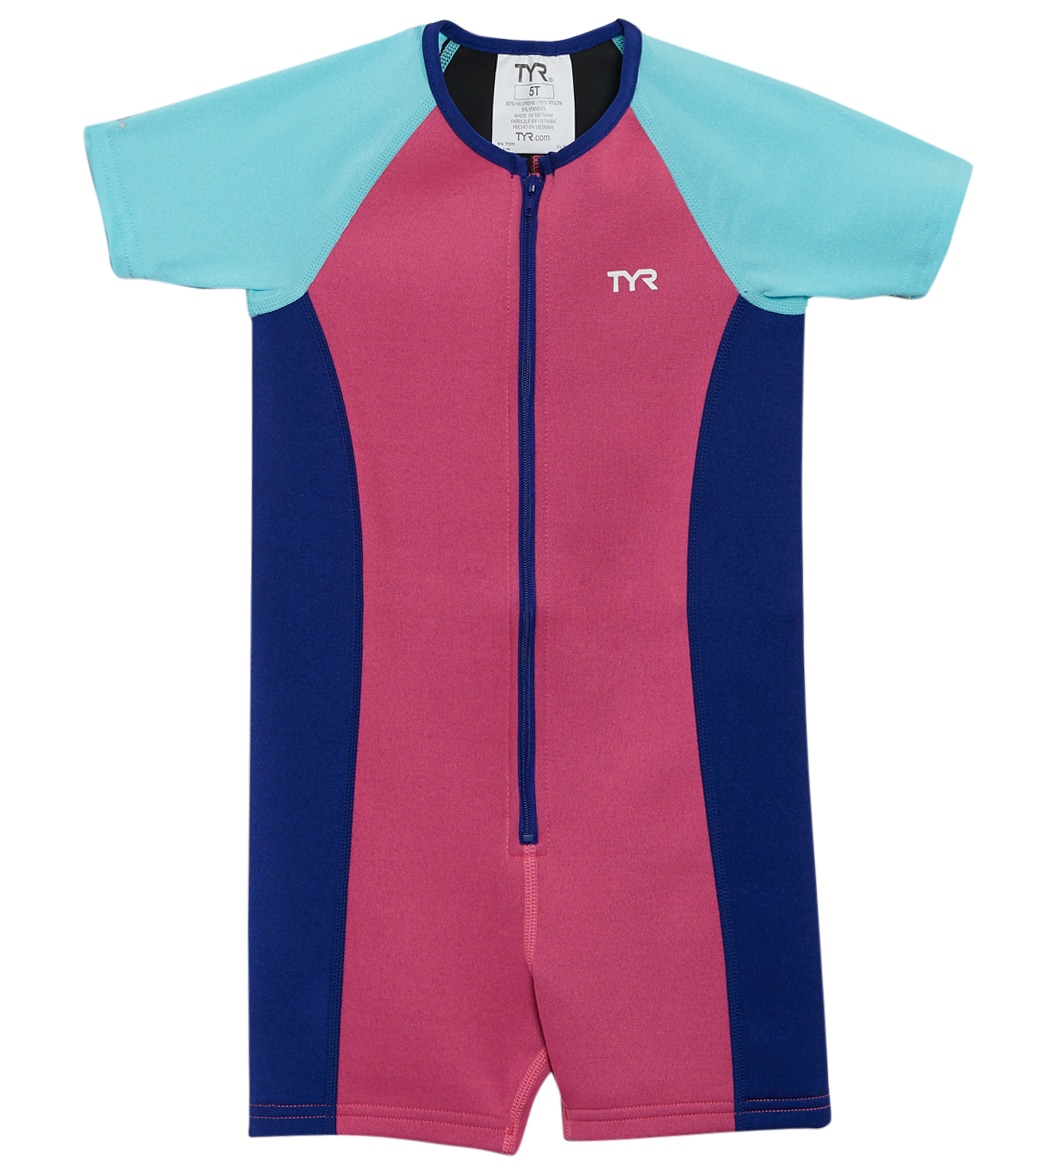 TYR Girls' Upf 50+ Short Sleeve Solid Thermal Suit Toddler/Little/Big Kid - Pink/Mint/Royal 4T - Swimoutlet.com